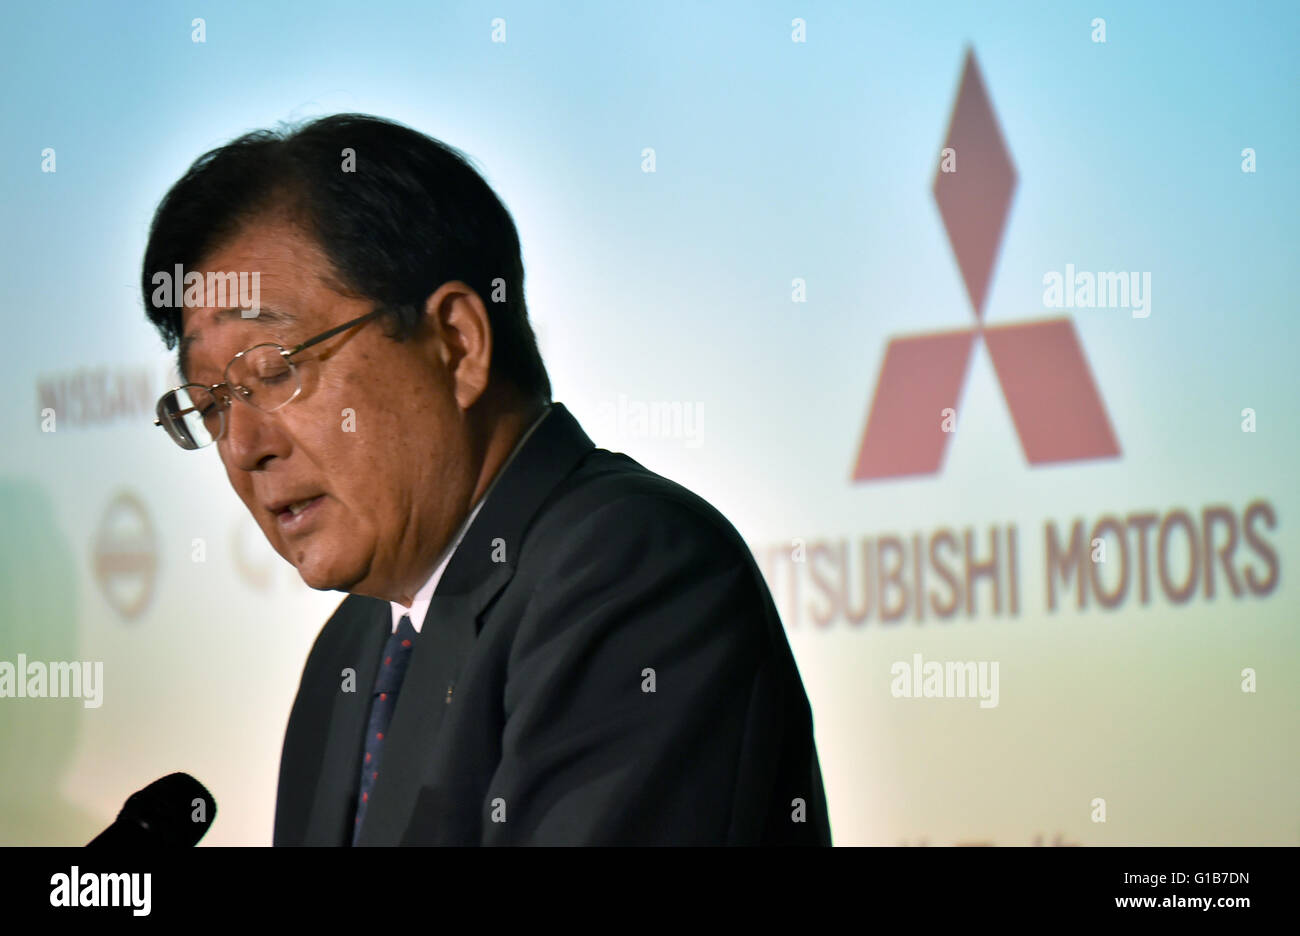 Yokohama, Japan. 12th May, 2016. Chairman Osamu Mashiko of Mitsubishi Motors speaks during an impromptu news conference at Nissans head office in Yokohama, south of Tokyo, on Thursday, May 12, 2016. Nissann Motor Chairman Carlos Ghosn announced that his company will pay 2.17 billion dollars for a 34% stake in the scandal-hit Mitsubishi, making Nissan the single largest shareholder. Mashikos Mitsubishi was tarnished by intentionally falsifying fuel mileage test data for several vehicle models. © Natsuki Sakai/AFLO/Alamy Live News Stock Photo